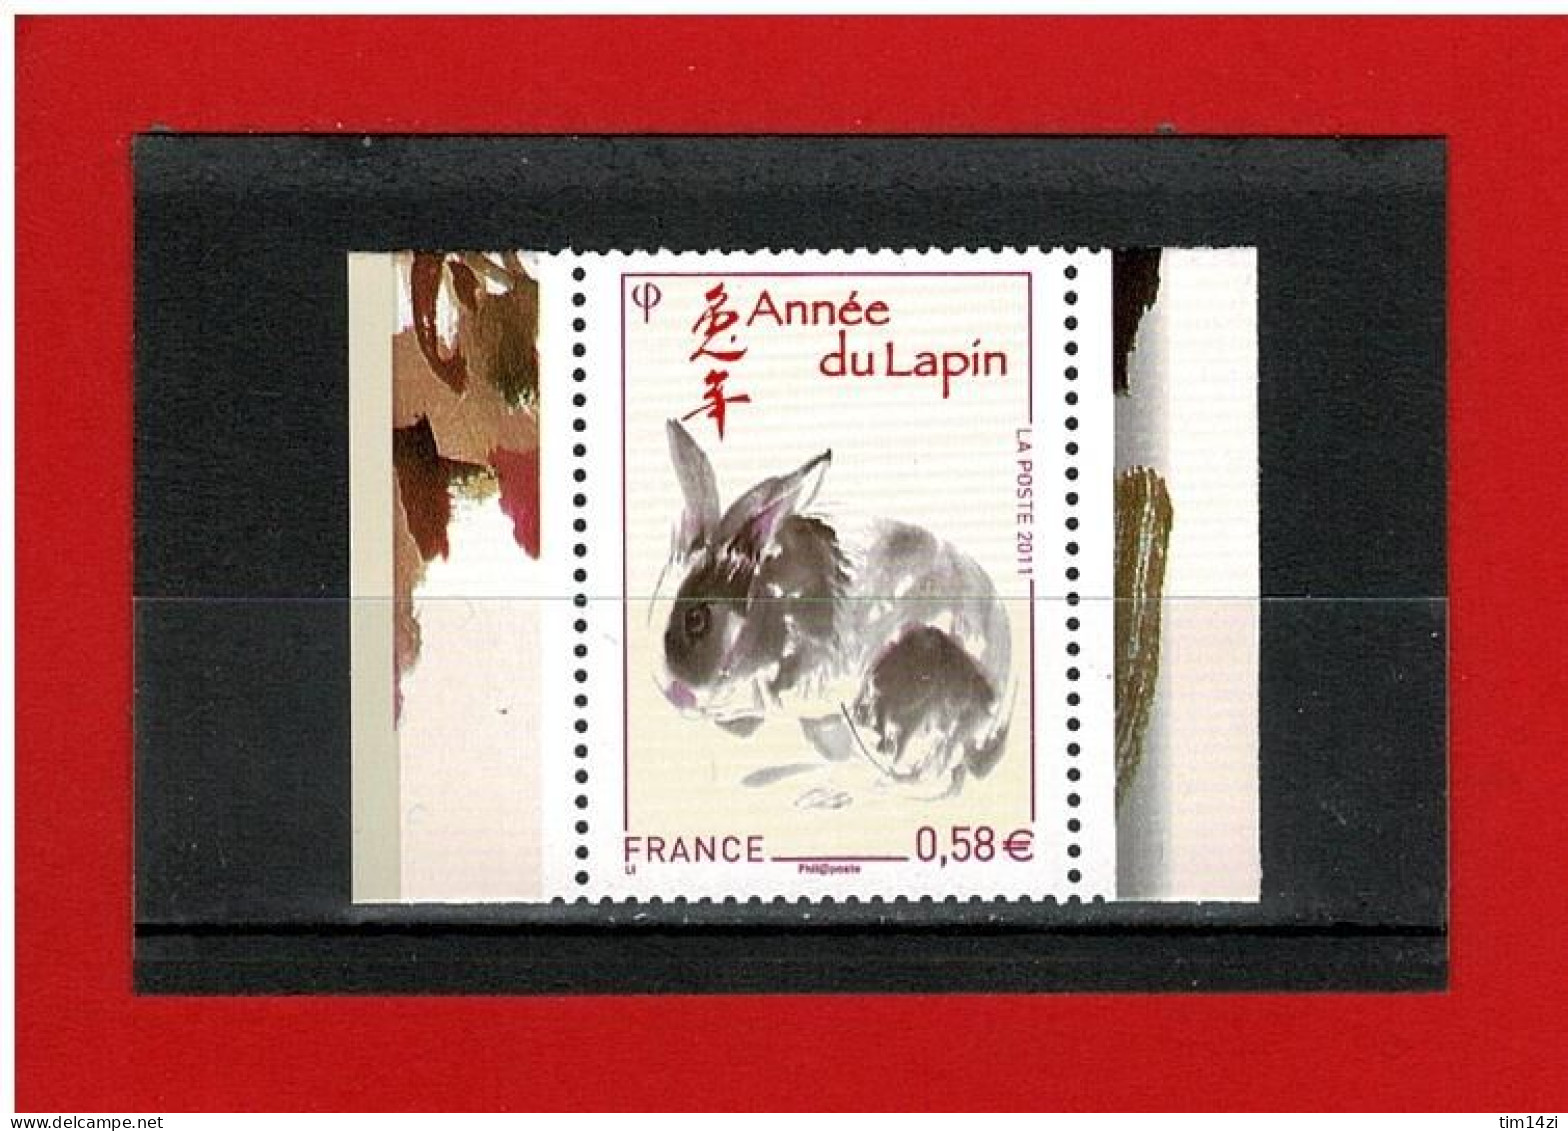 2011 - ANNEE LUNAIRE CHINOISE DU LAPIN - N° 4531- NEUF** - COTE Y & T : 2.00 Euros - Nuovi